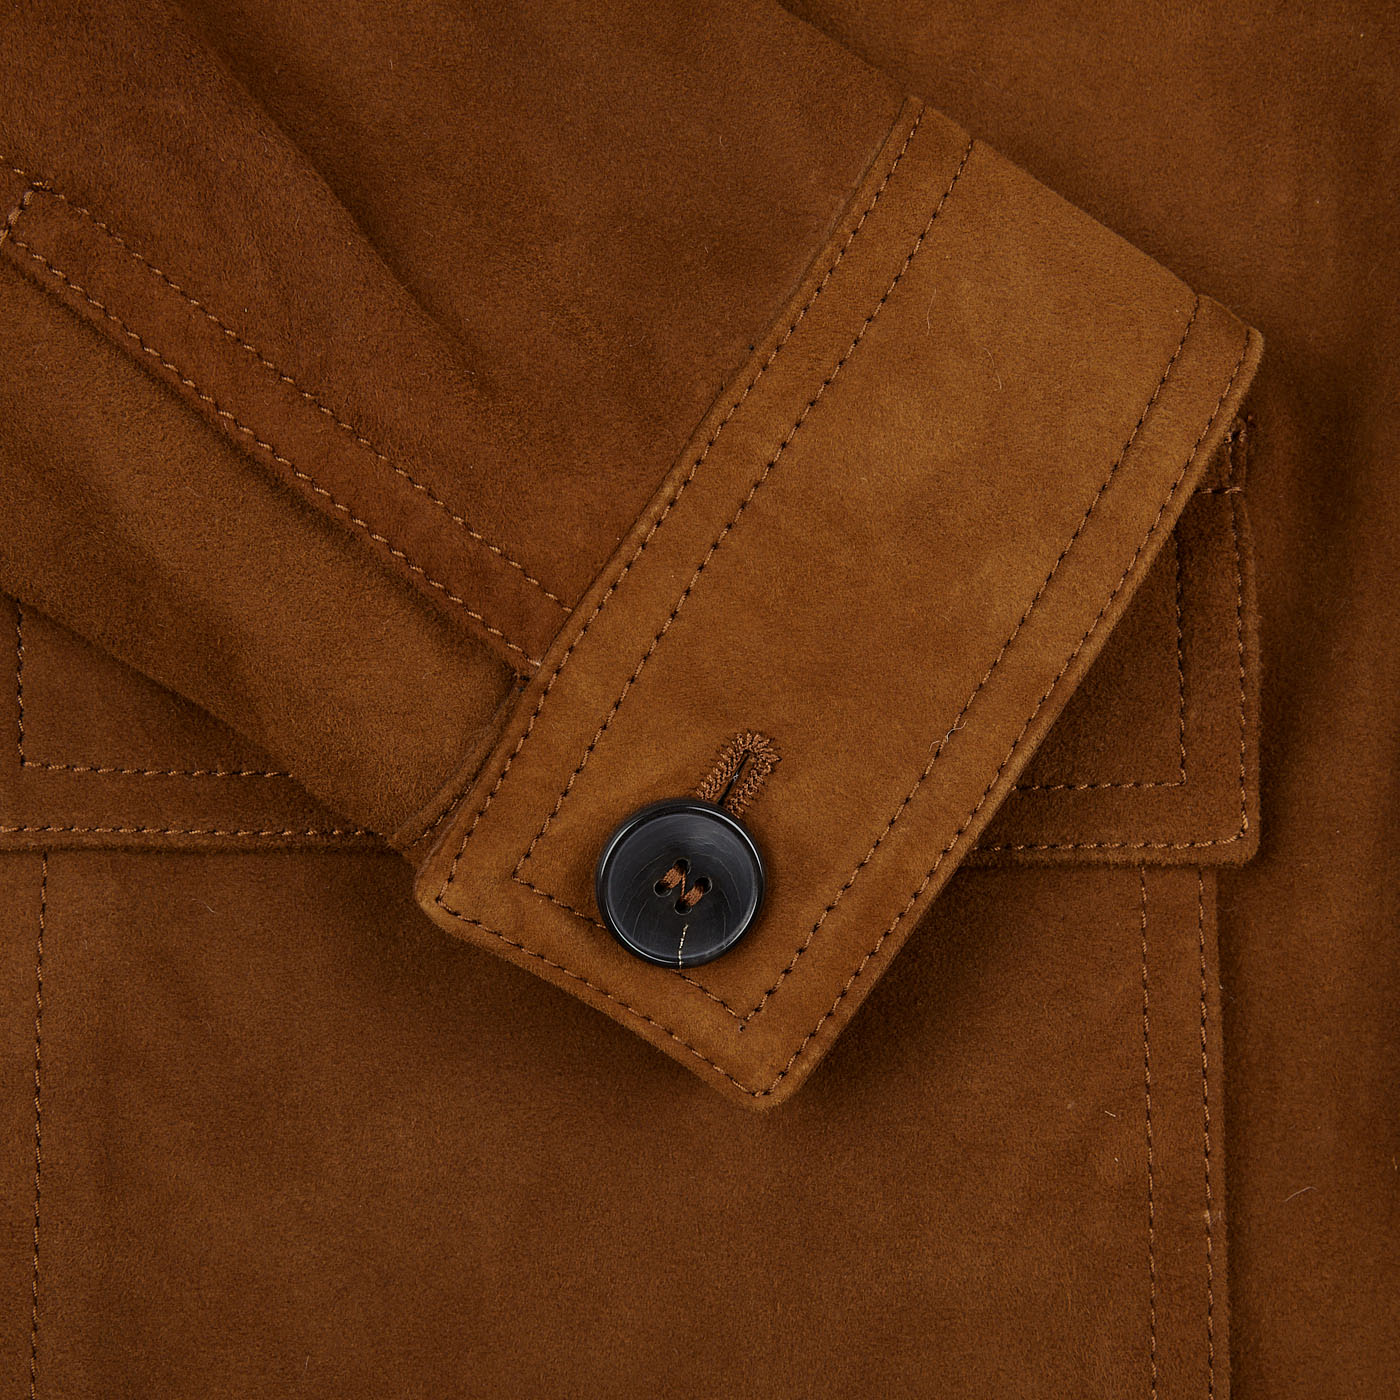 A close up image of a Sandalwood Suede Leather Anton Jacket by Werner Christ.